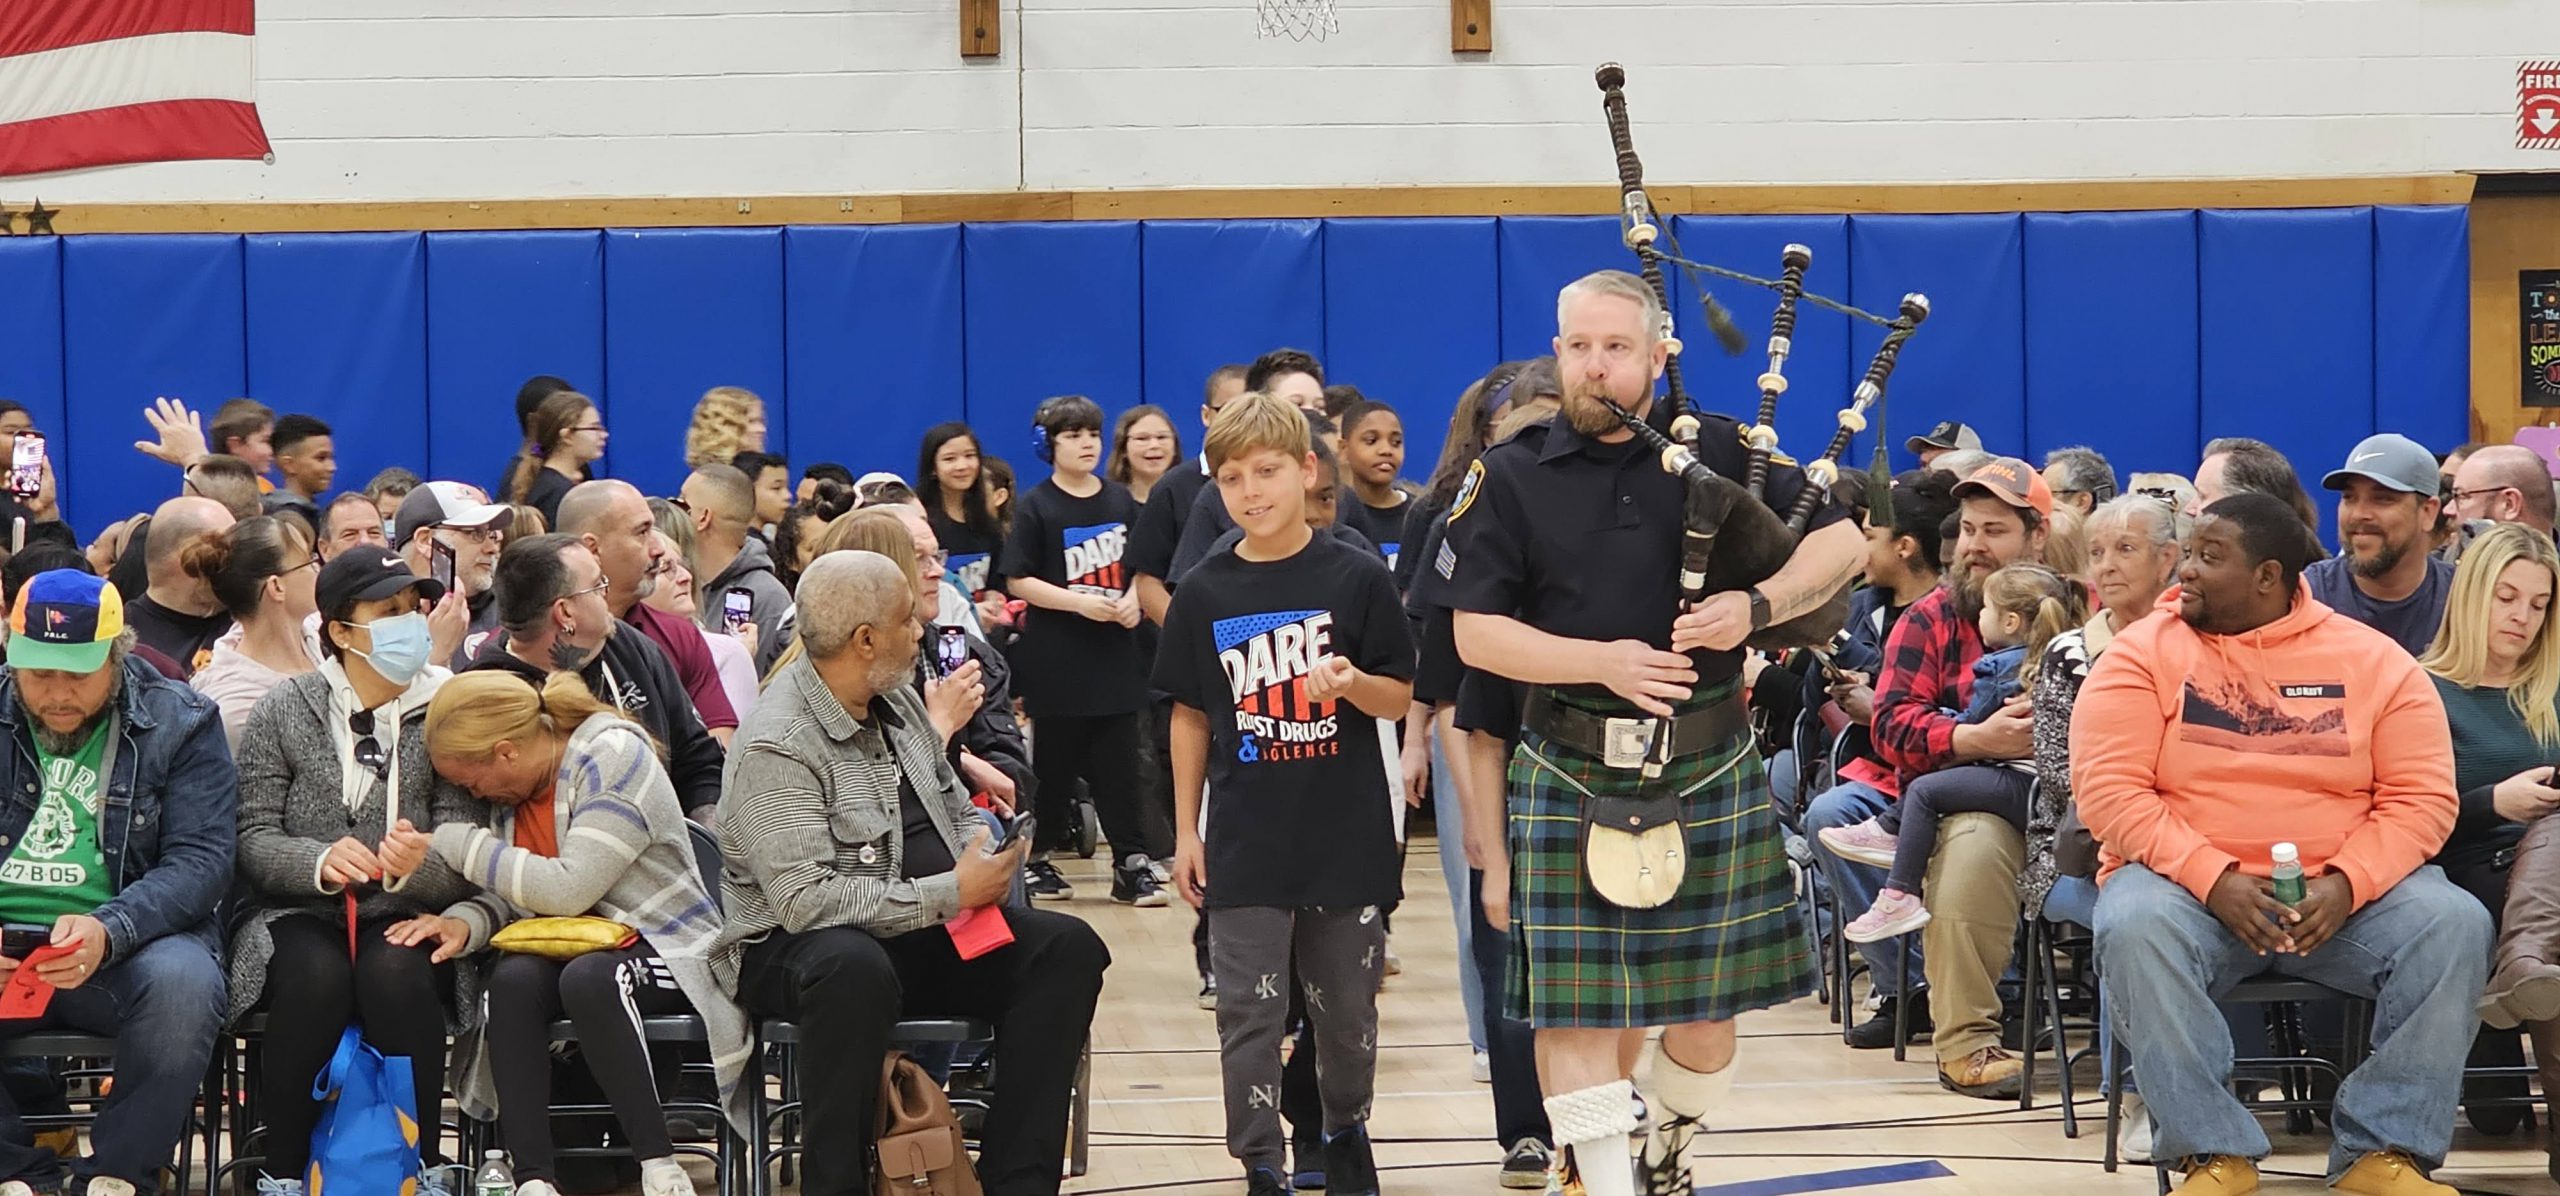 Berea DARE Graduates are led into their celebration with a bagpiper player.  The audience is on either side